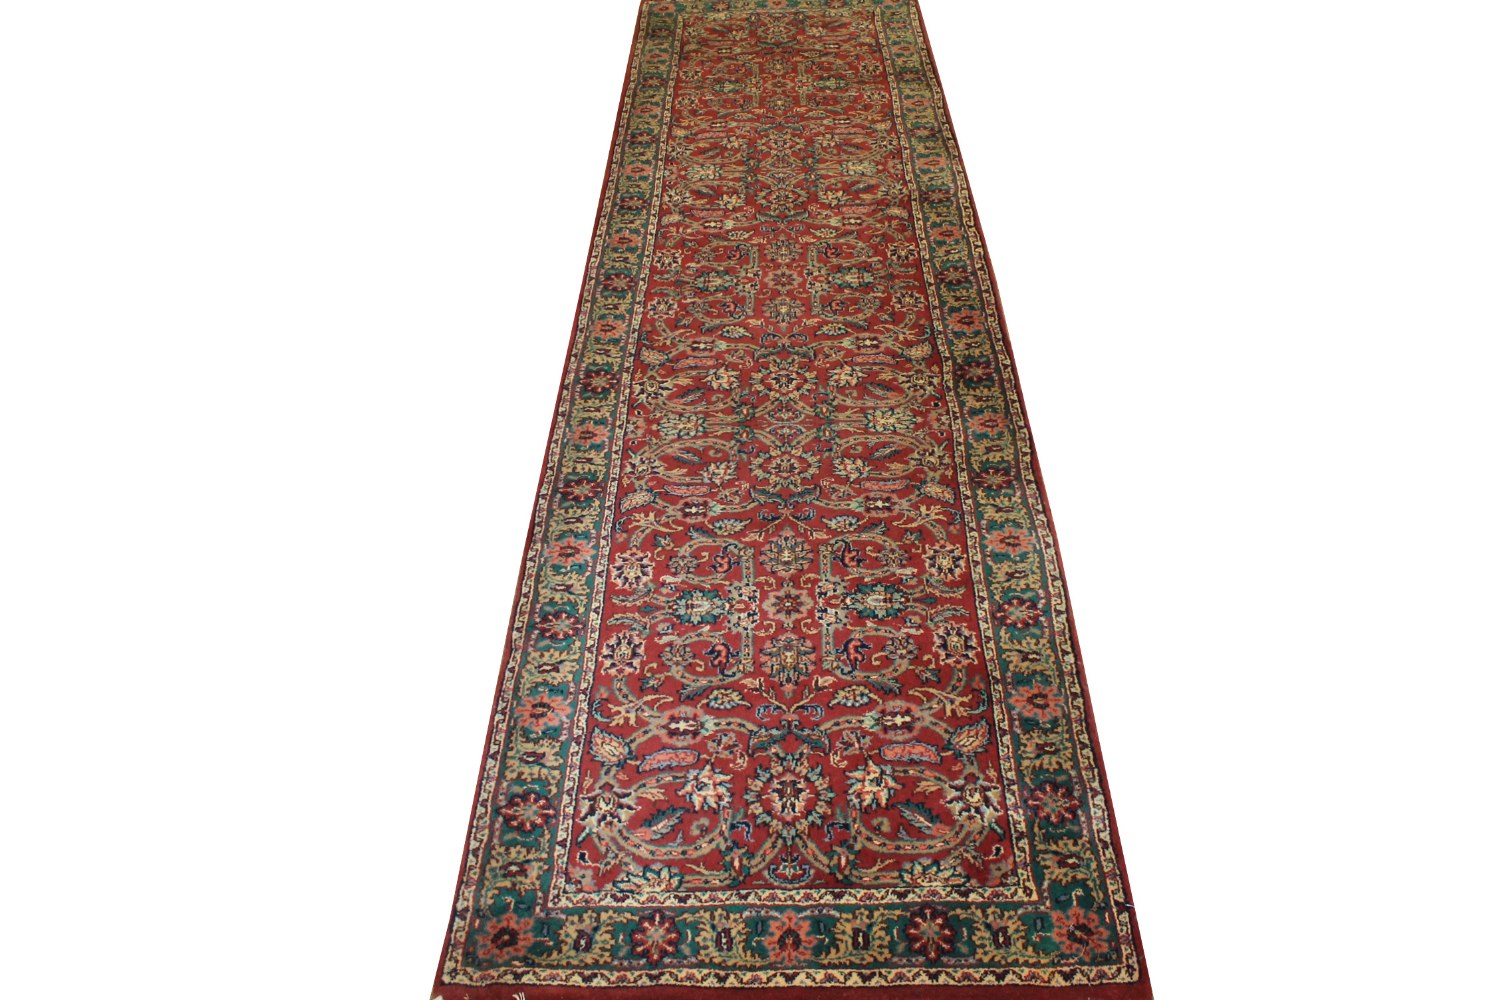 10 Runner Jaipur Hand Knotted Wool Area Rug - MR021638